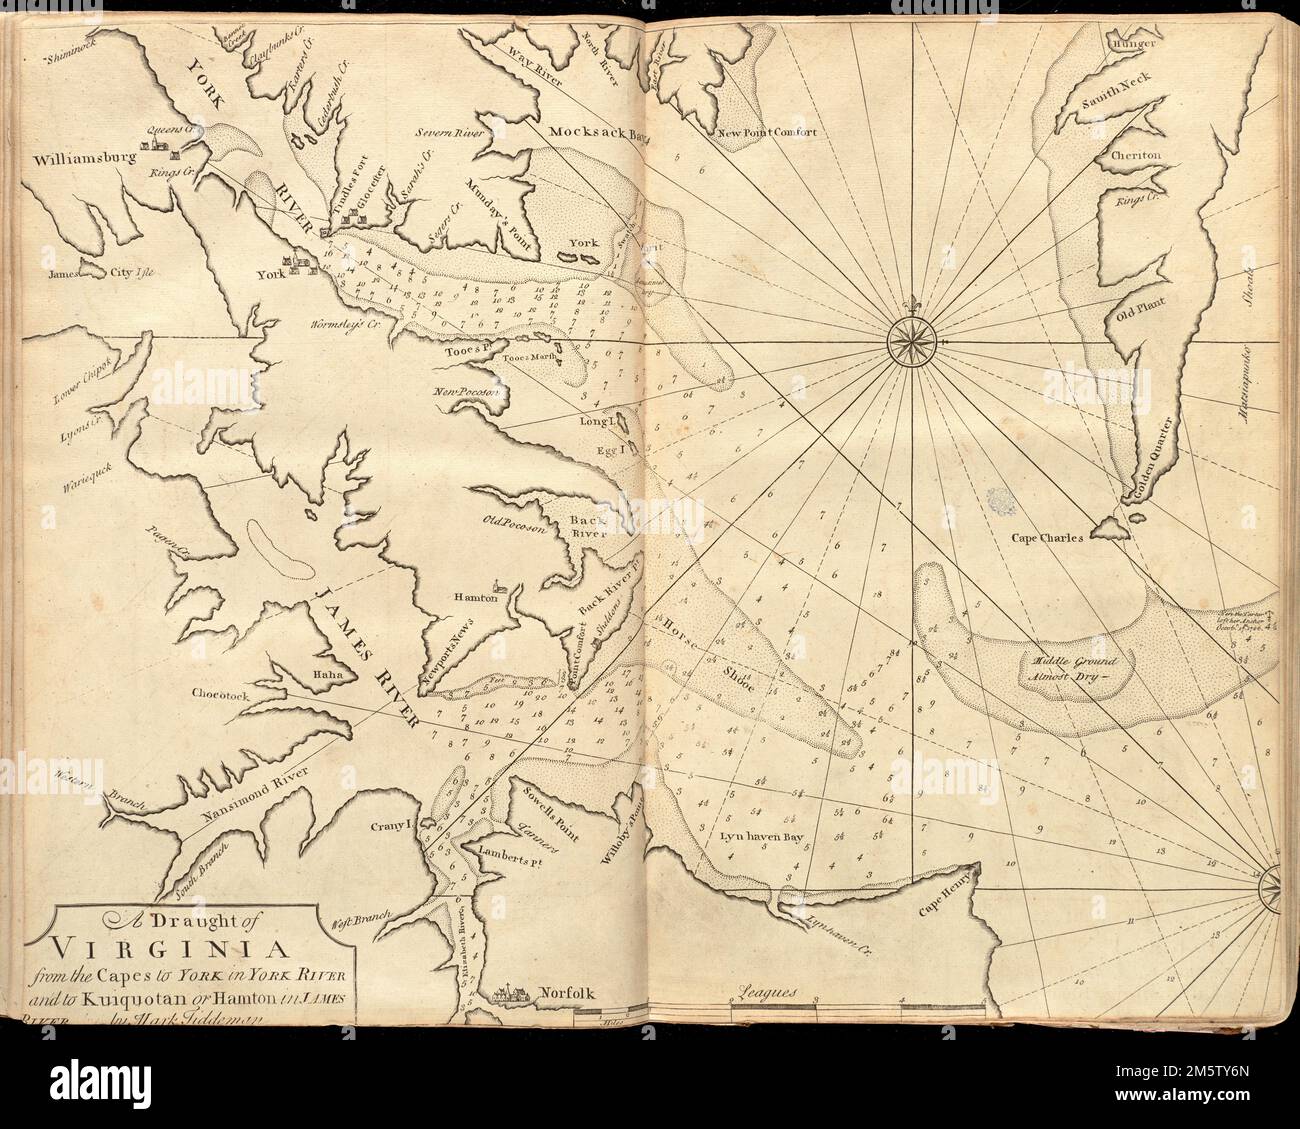 A draught of Virginia from the Capes to York in York River and to Kuiquotan or Hamton in James River. Depths shown by soundings. In the English pilot, the fourth book. London : Printed for William Mount and Thomas Page, 1737.... , Chesapeake Bay Virginia Stock Photo